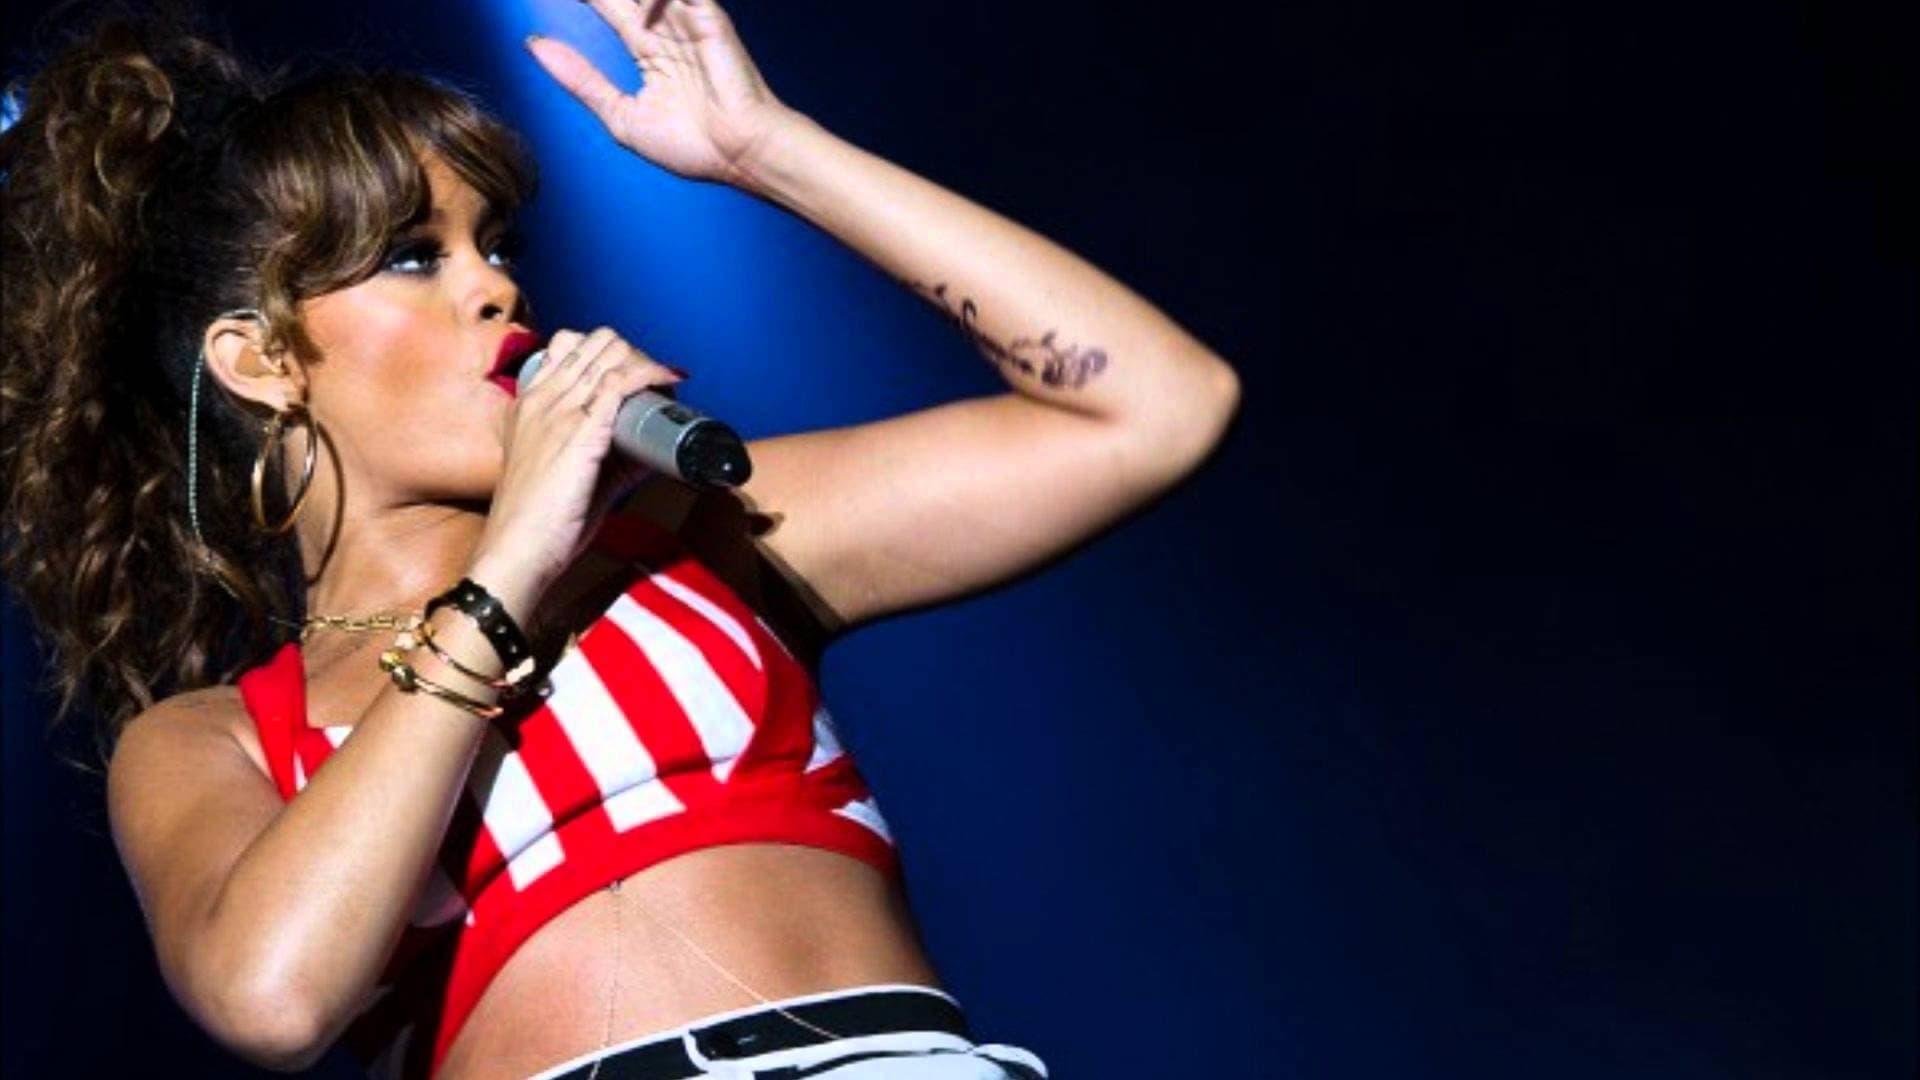 Rihanna – The Loud Tour at Rock in Rio backdrop